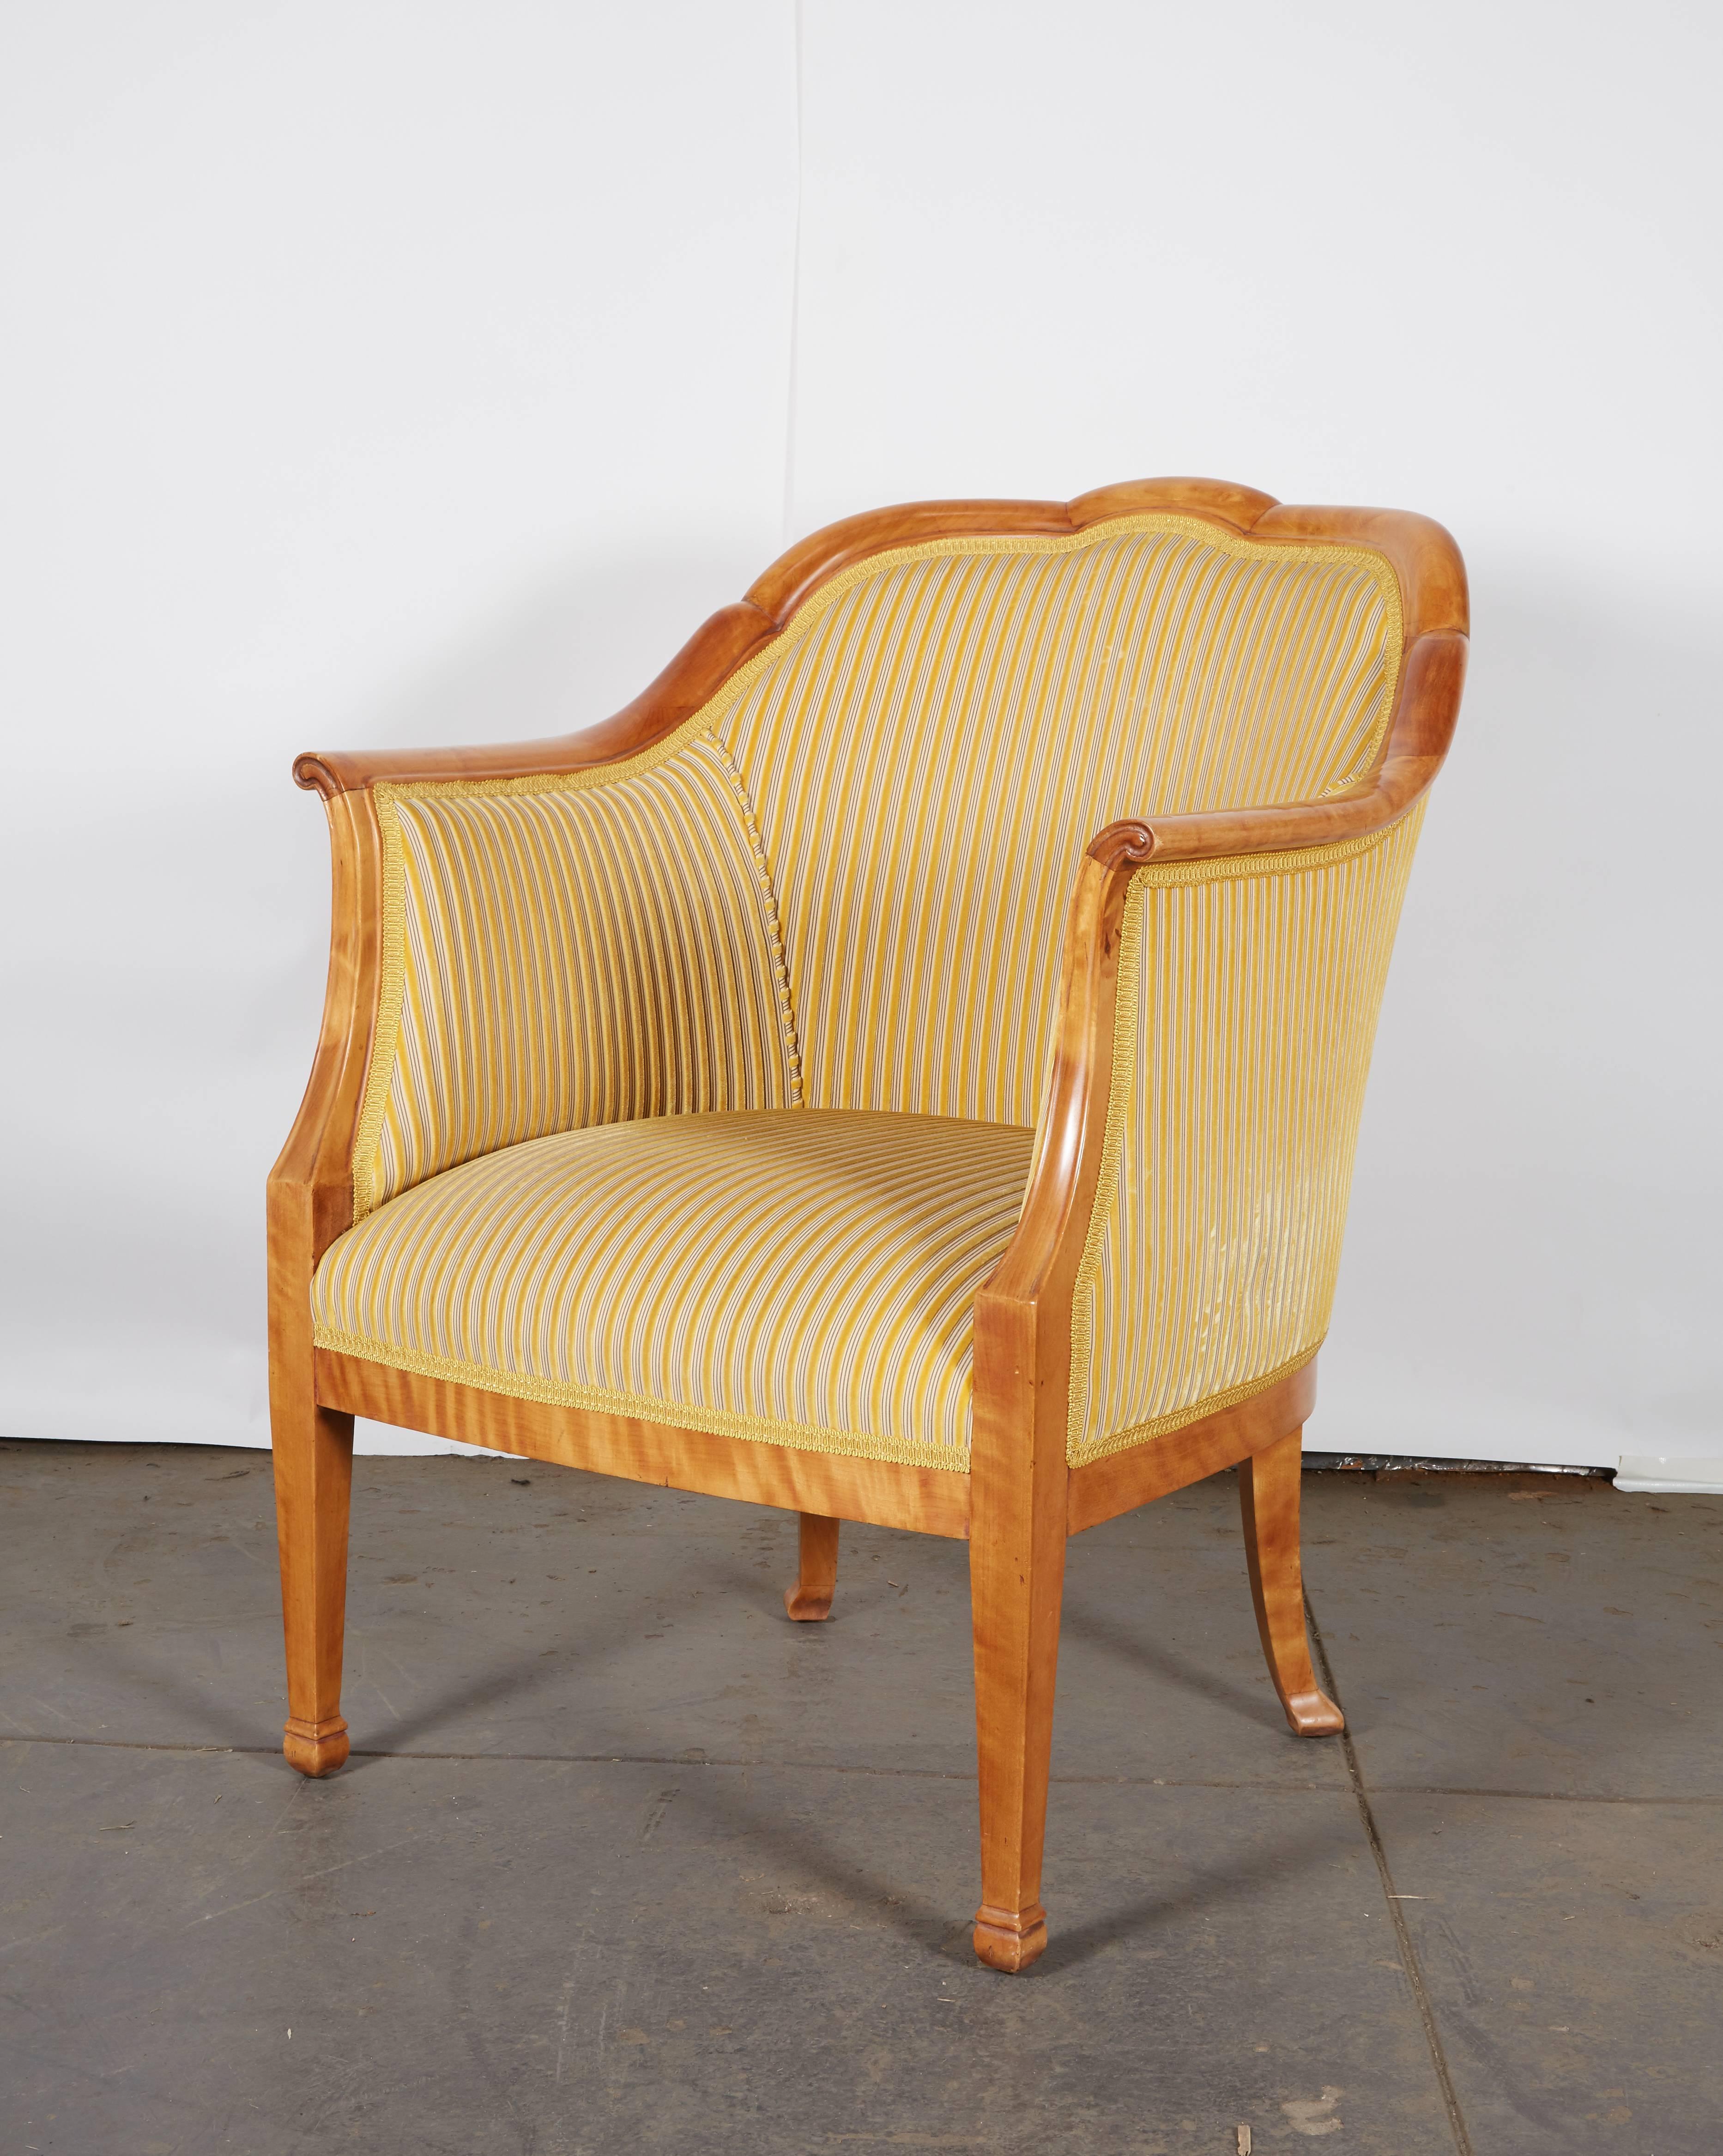 Streamlined neoclassical lines distinguish this pair of elegant armchairs. Raised on square tapering legs ending in block feet. Upholstered in Nobilis striped velvet in yellow and gold.